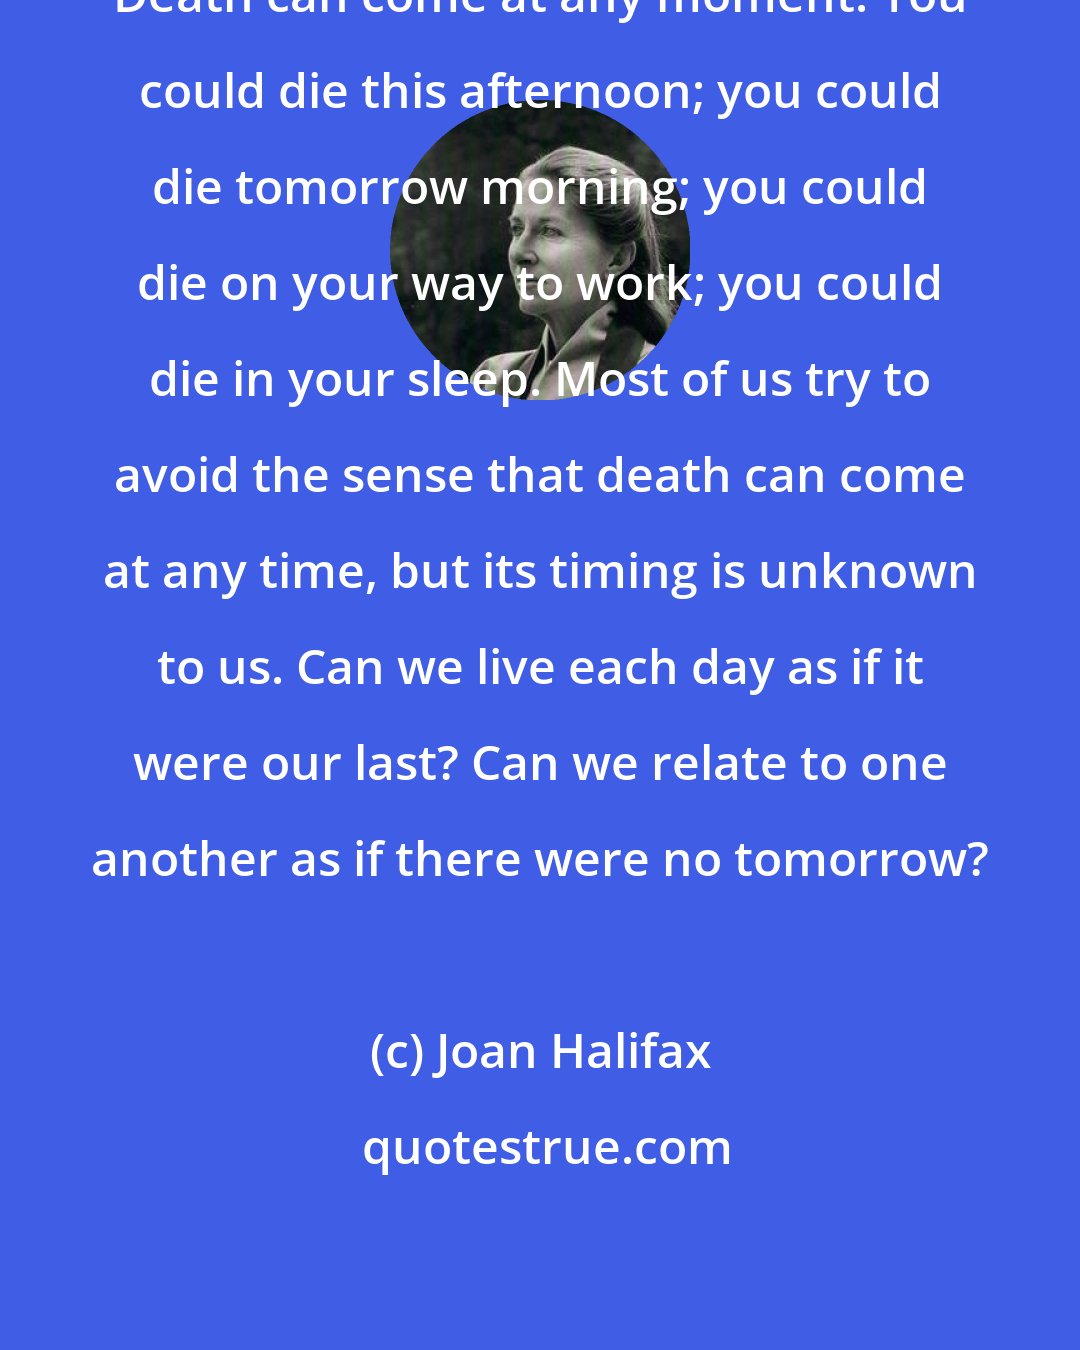 Joan Halifax: Death can come at any moment. You could die this afternoon; you could die tomorrow morning; you could die on your way to work; you could die in your sleep. Most of us try to avoid the sense that death can come at any time, but its timing is unknown to us. Can we live each day as if it were our last? Can we relate to one another as if there were no tomorrow?